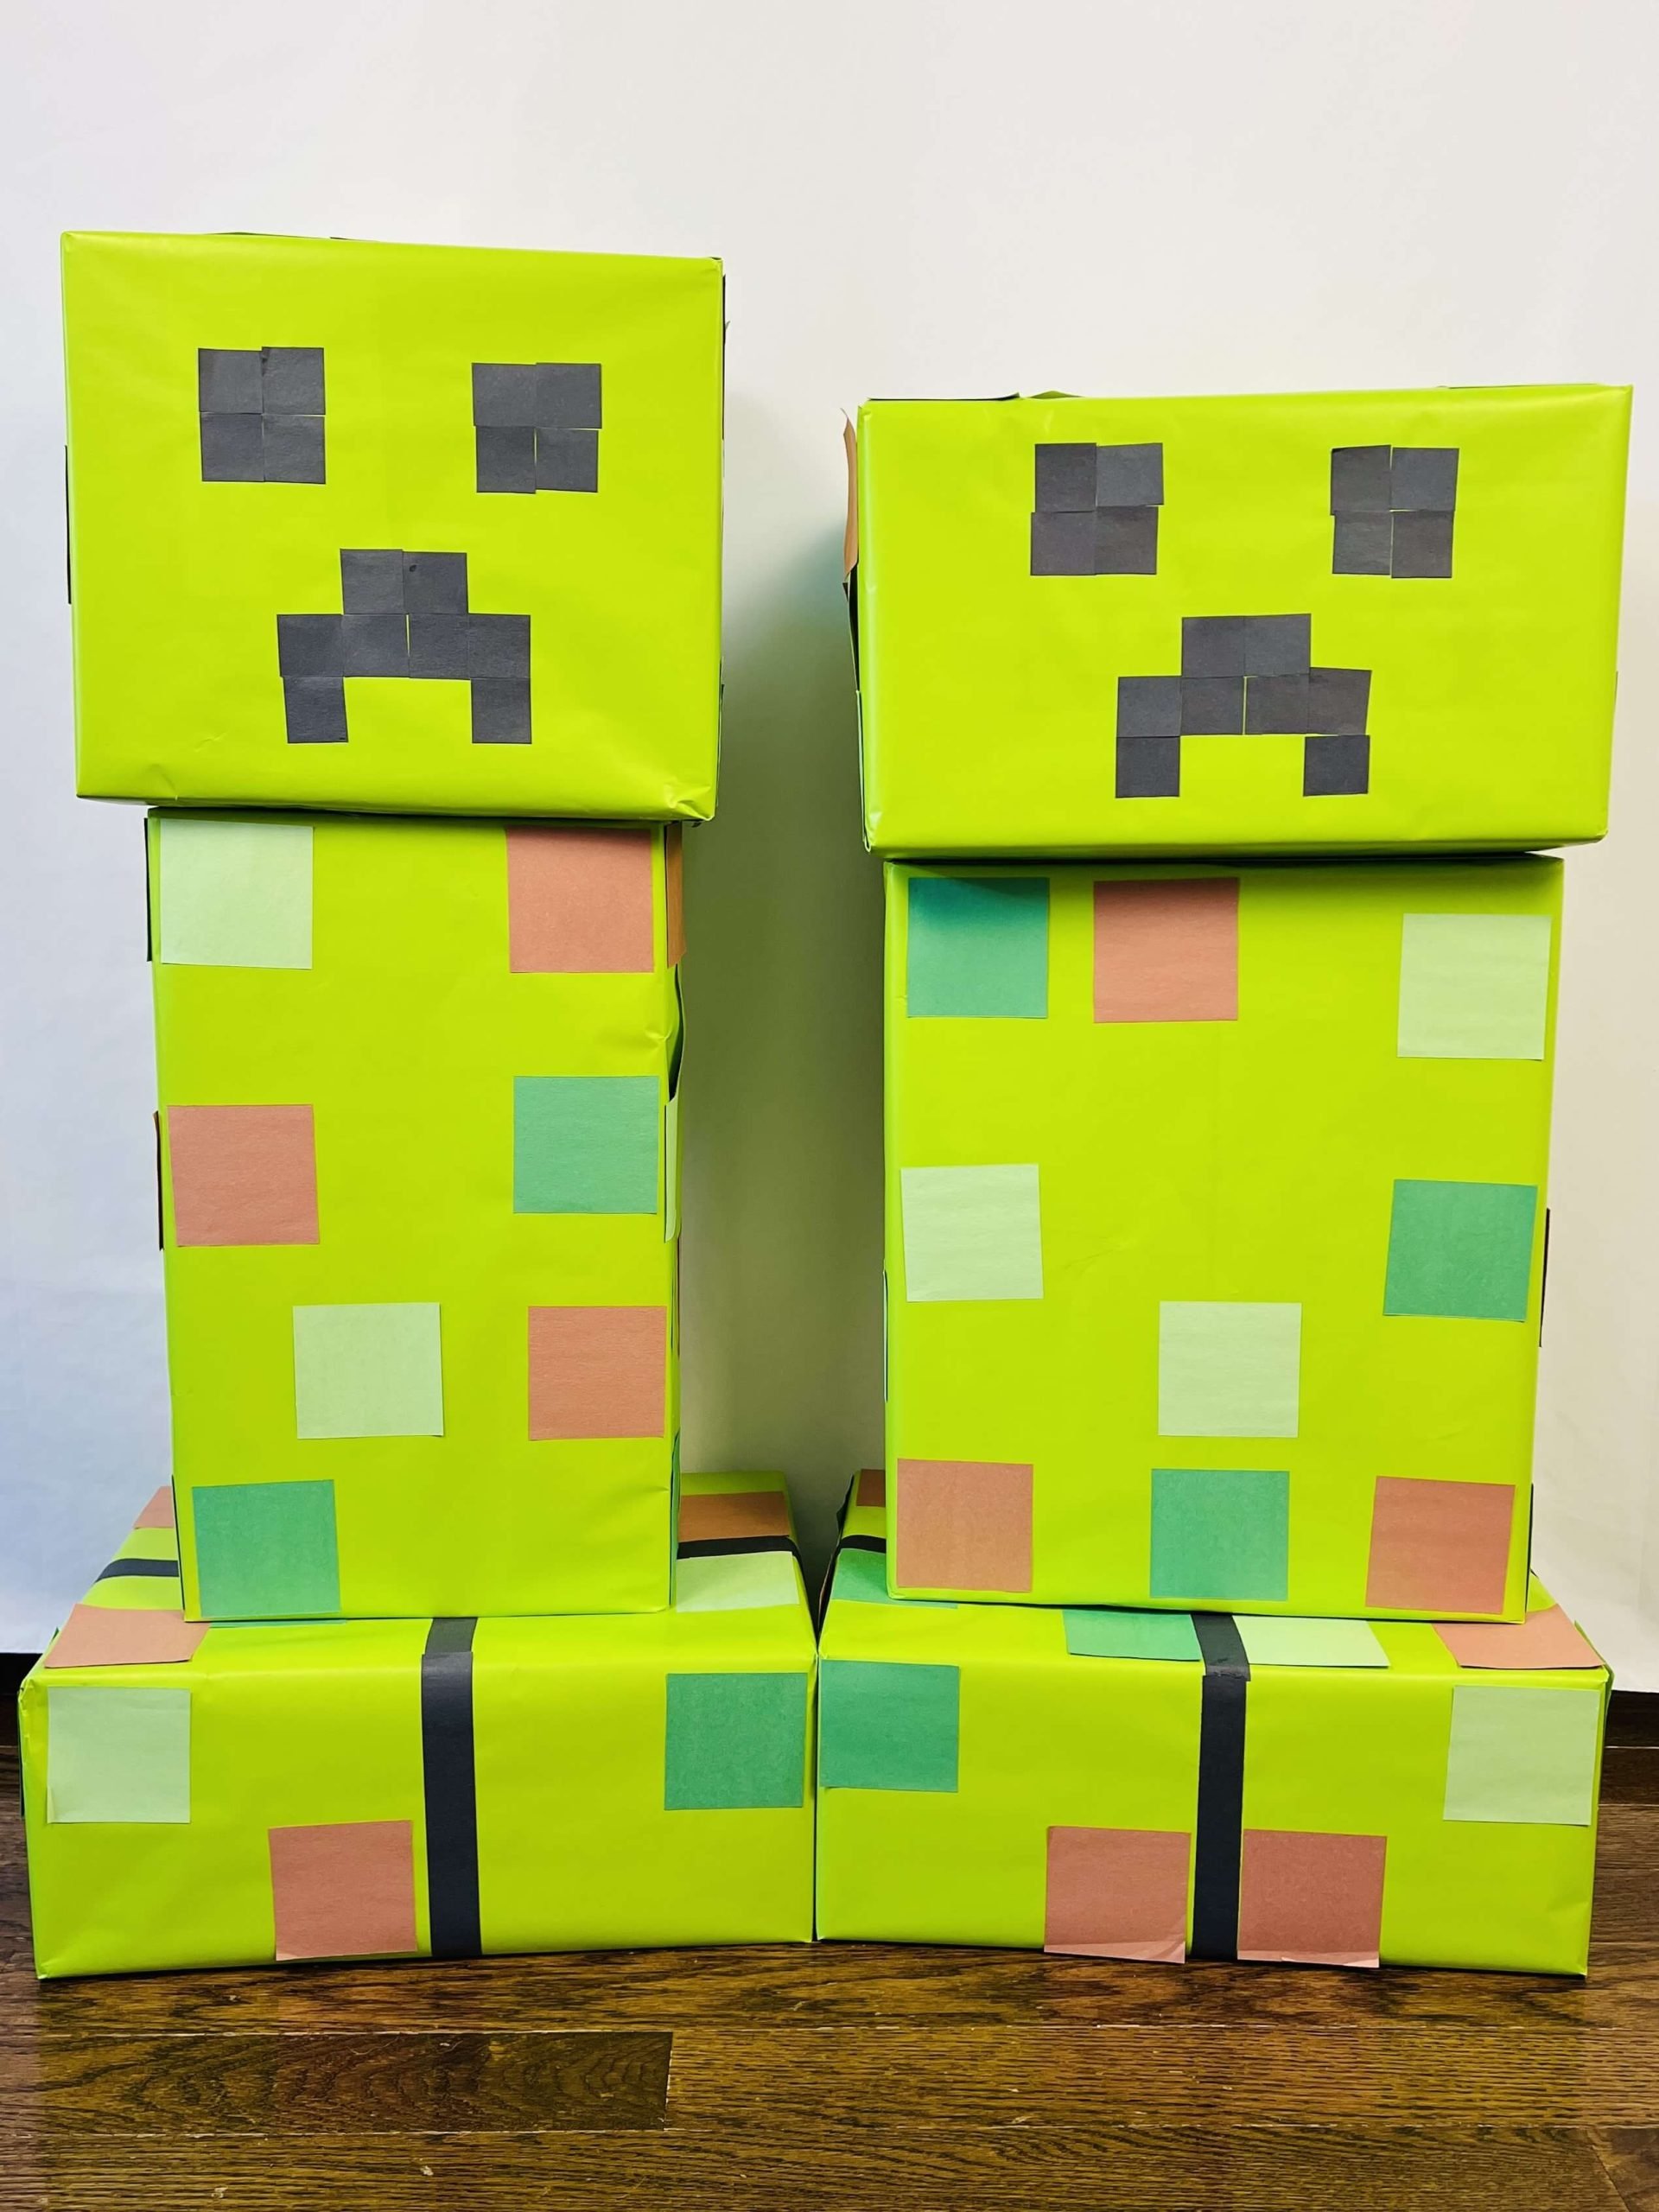 Mindcraft themed gift wrapping  Gift wrapping, Minecraft gifts, Gifts